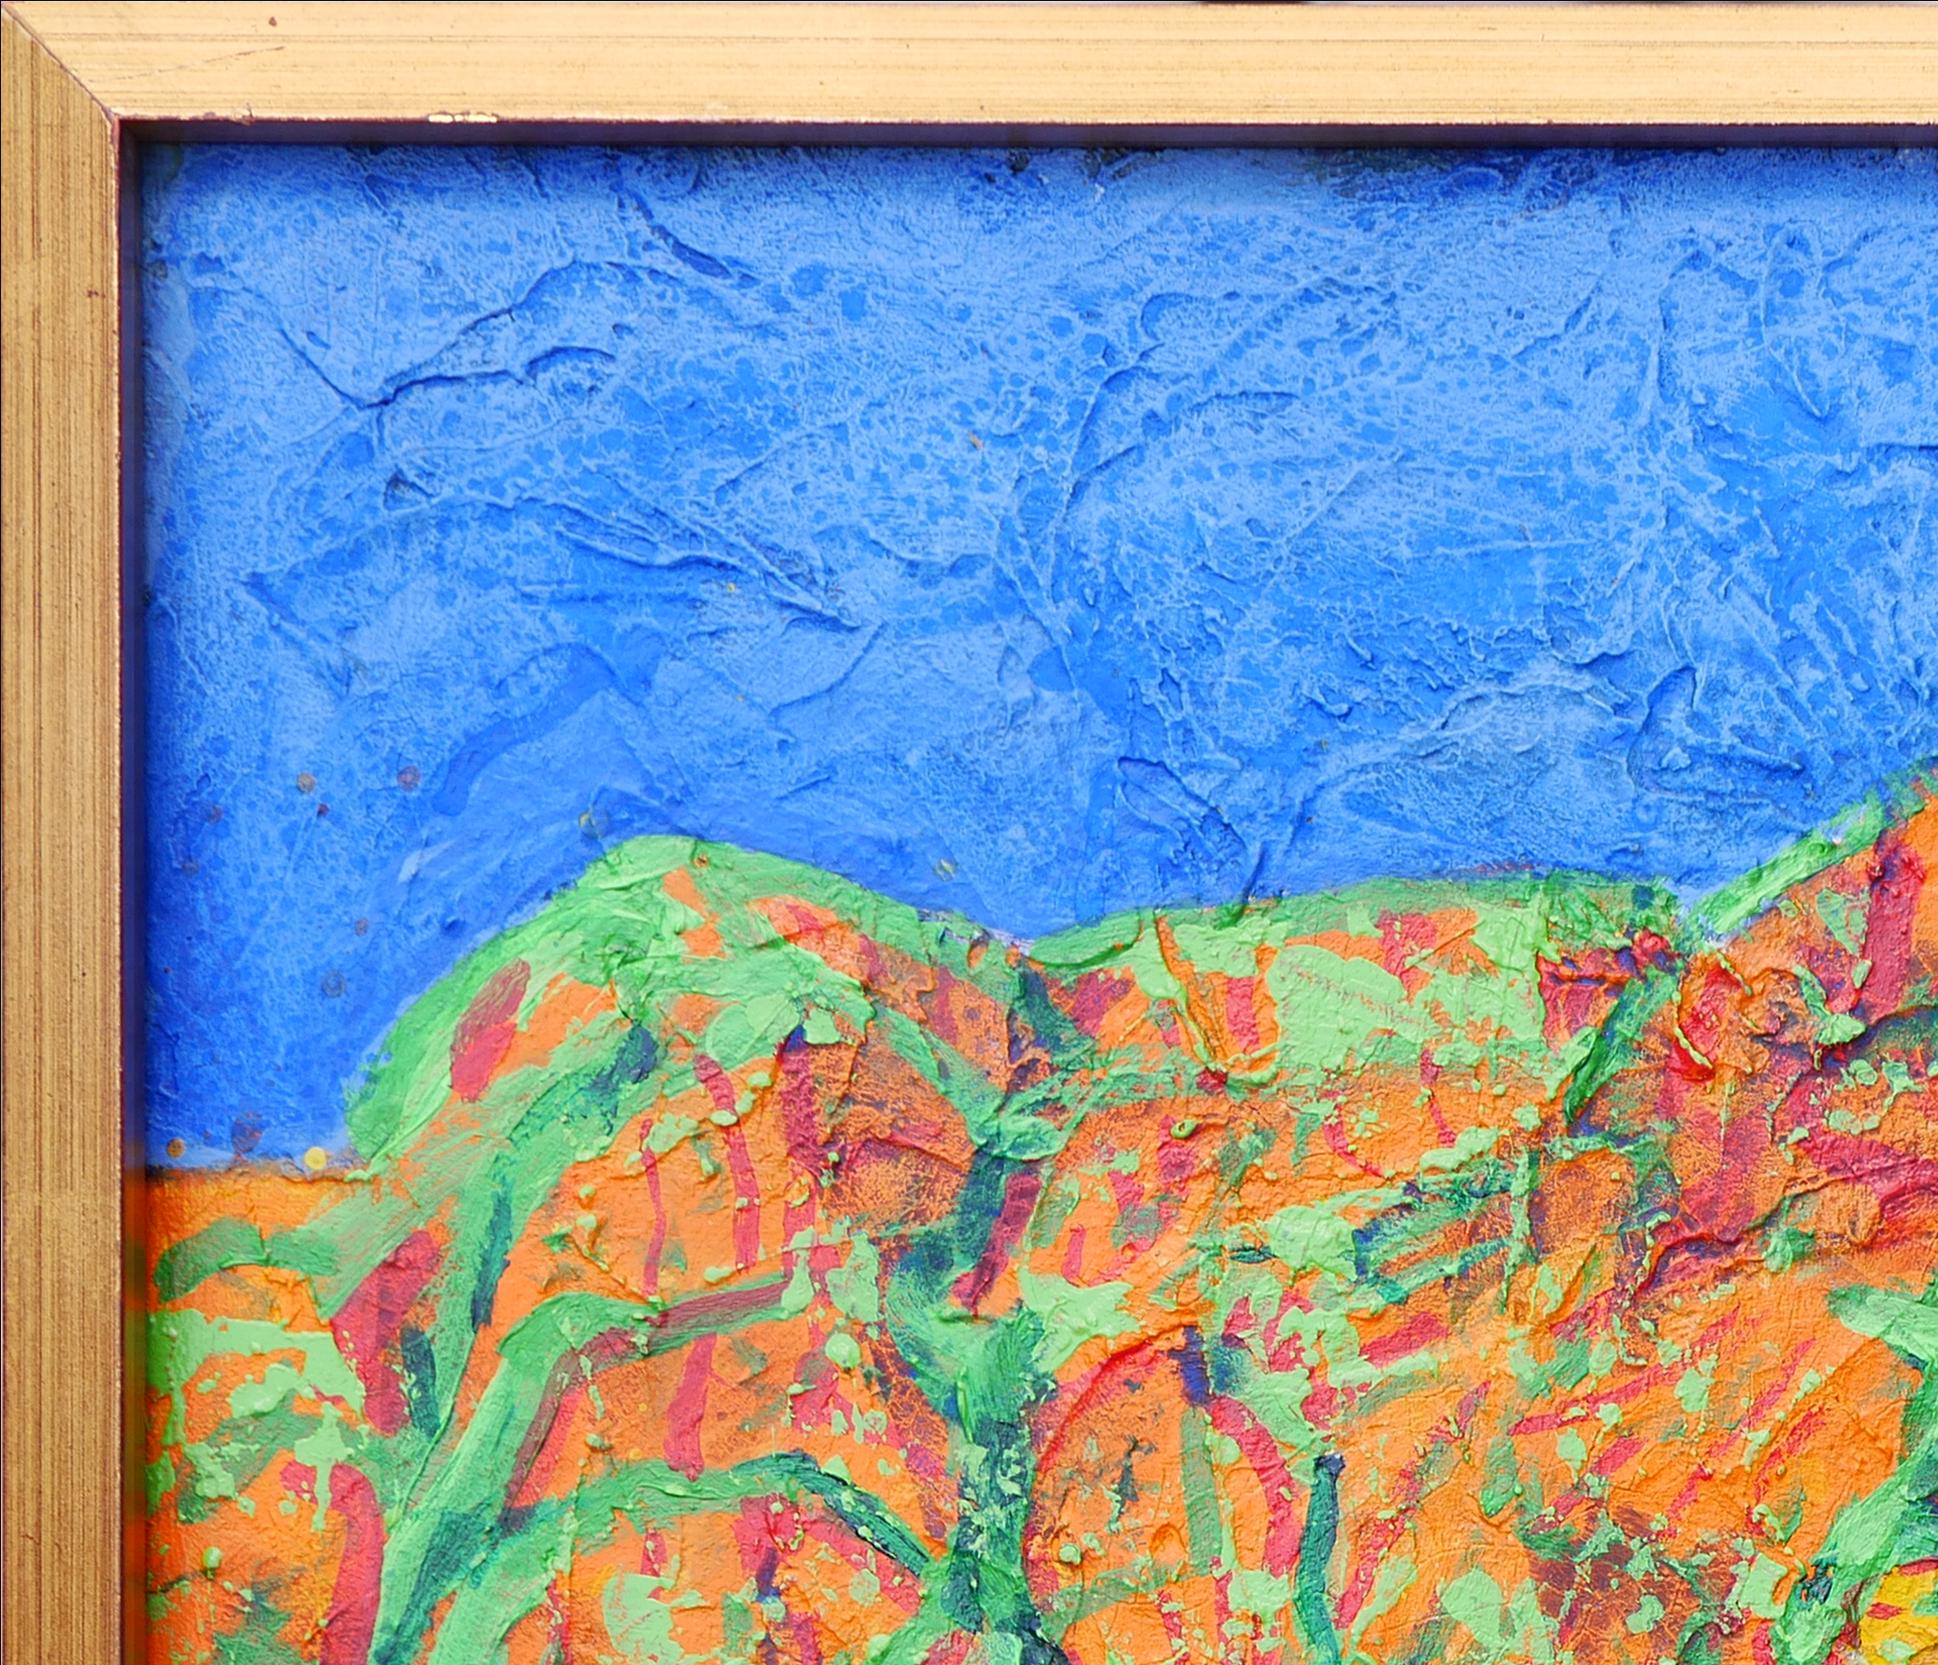 Blue, yellow, green, and orange abstract landscape painting by Houston, TX artist Earl Staley. The painting depicts the Chisos Mountains at Big Bend National Park in different striking colors. Signed, titled, and dated by the artist at the back.